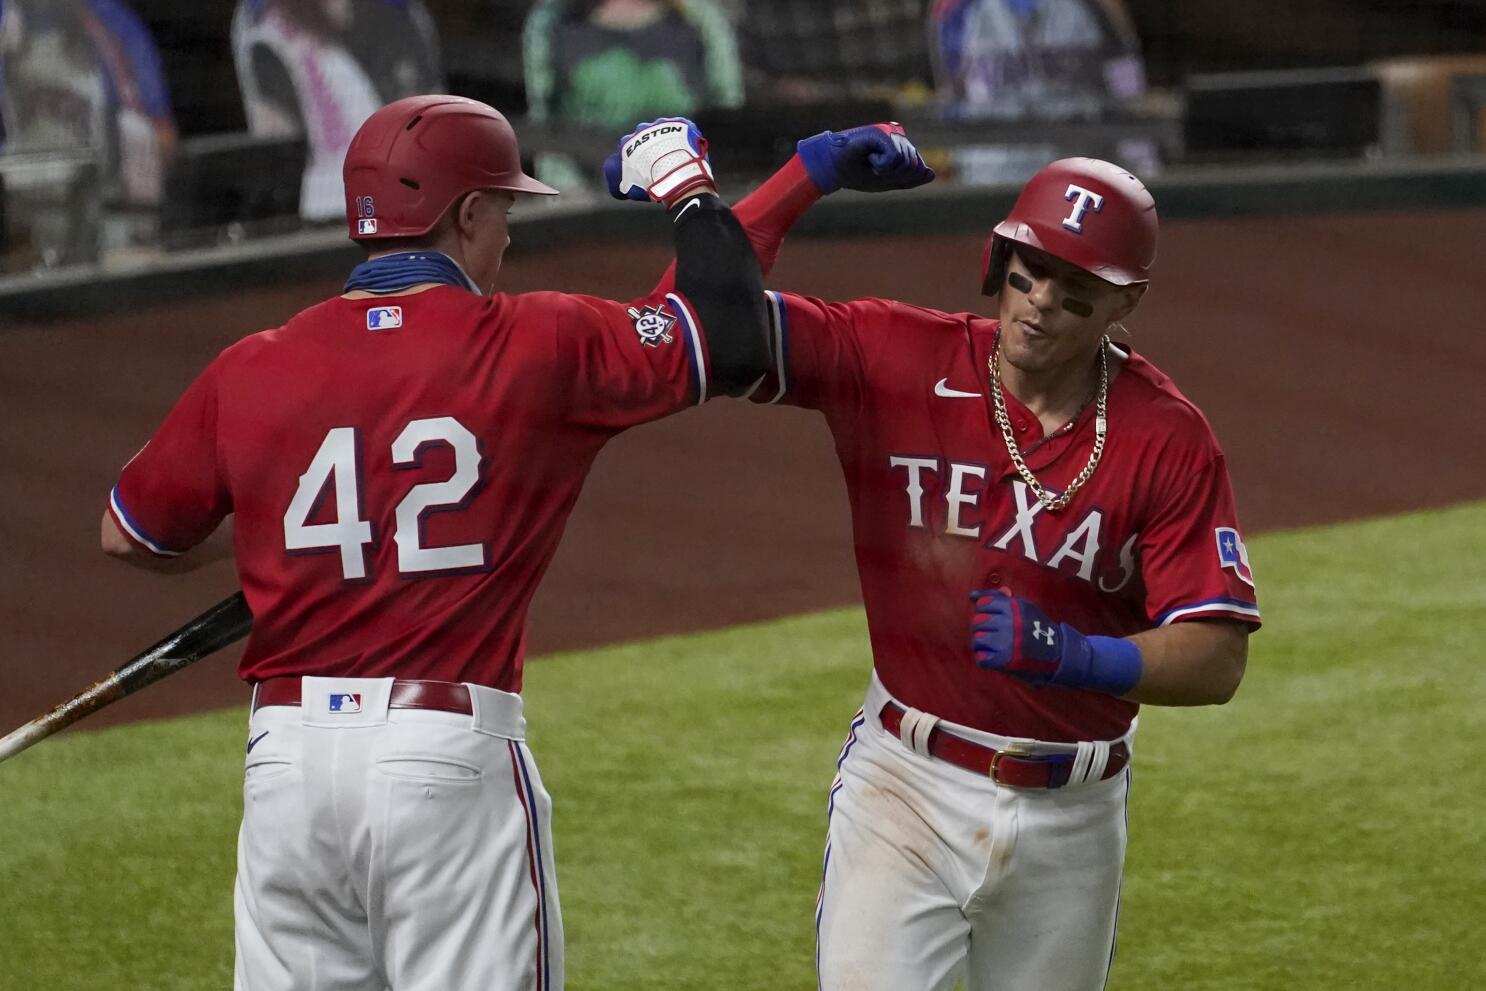 Dietrich HR sparks Rangers in 6-2 win over ML-best Dodgers - The